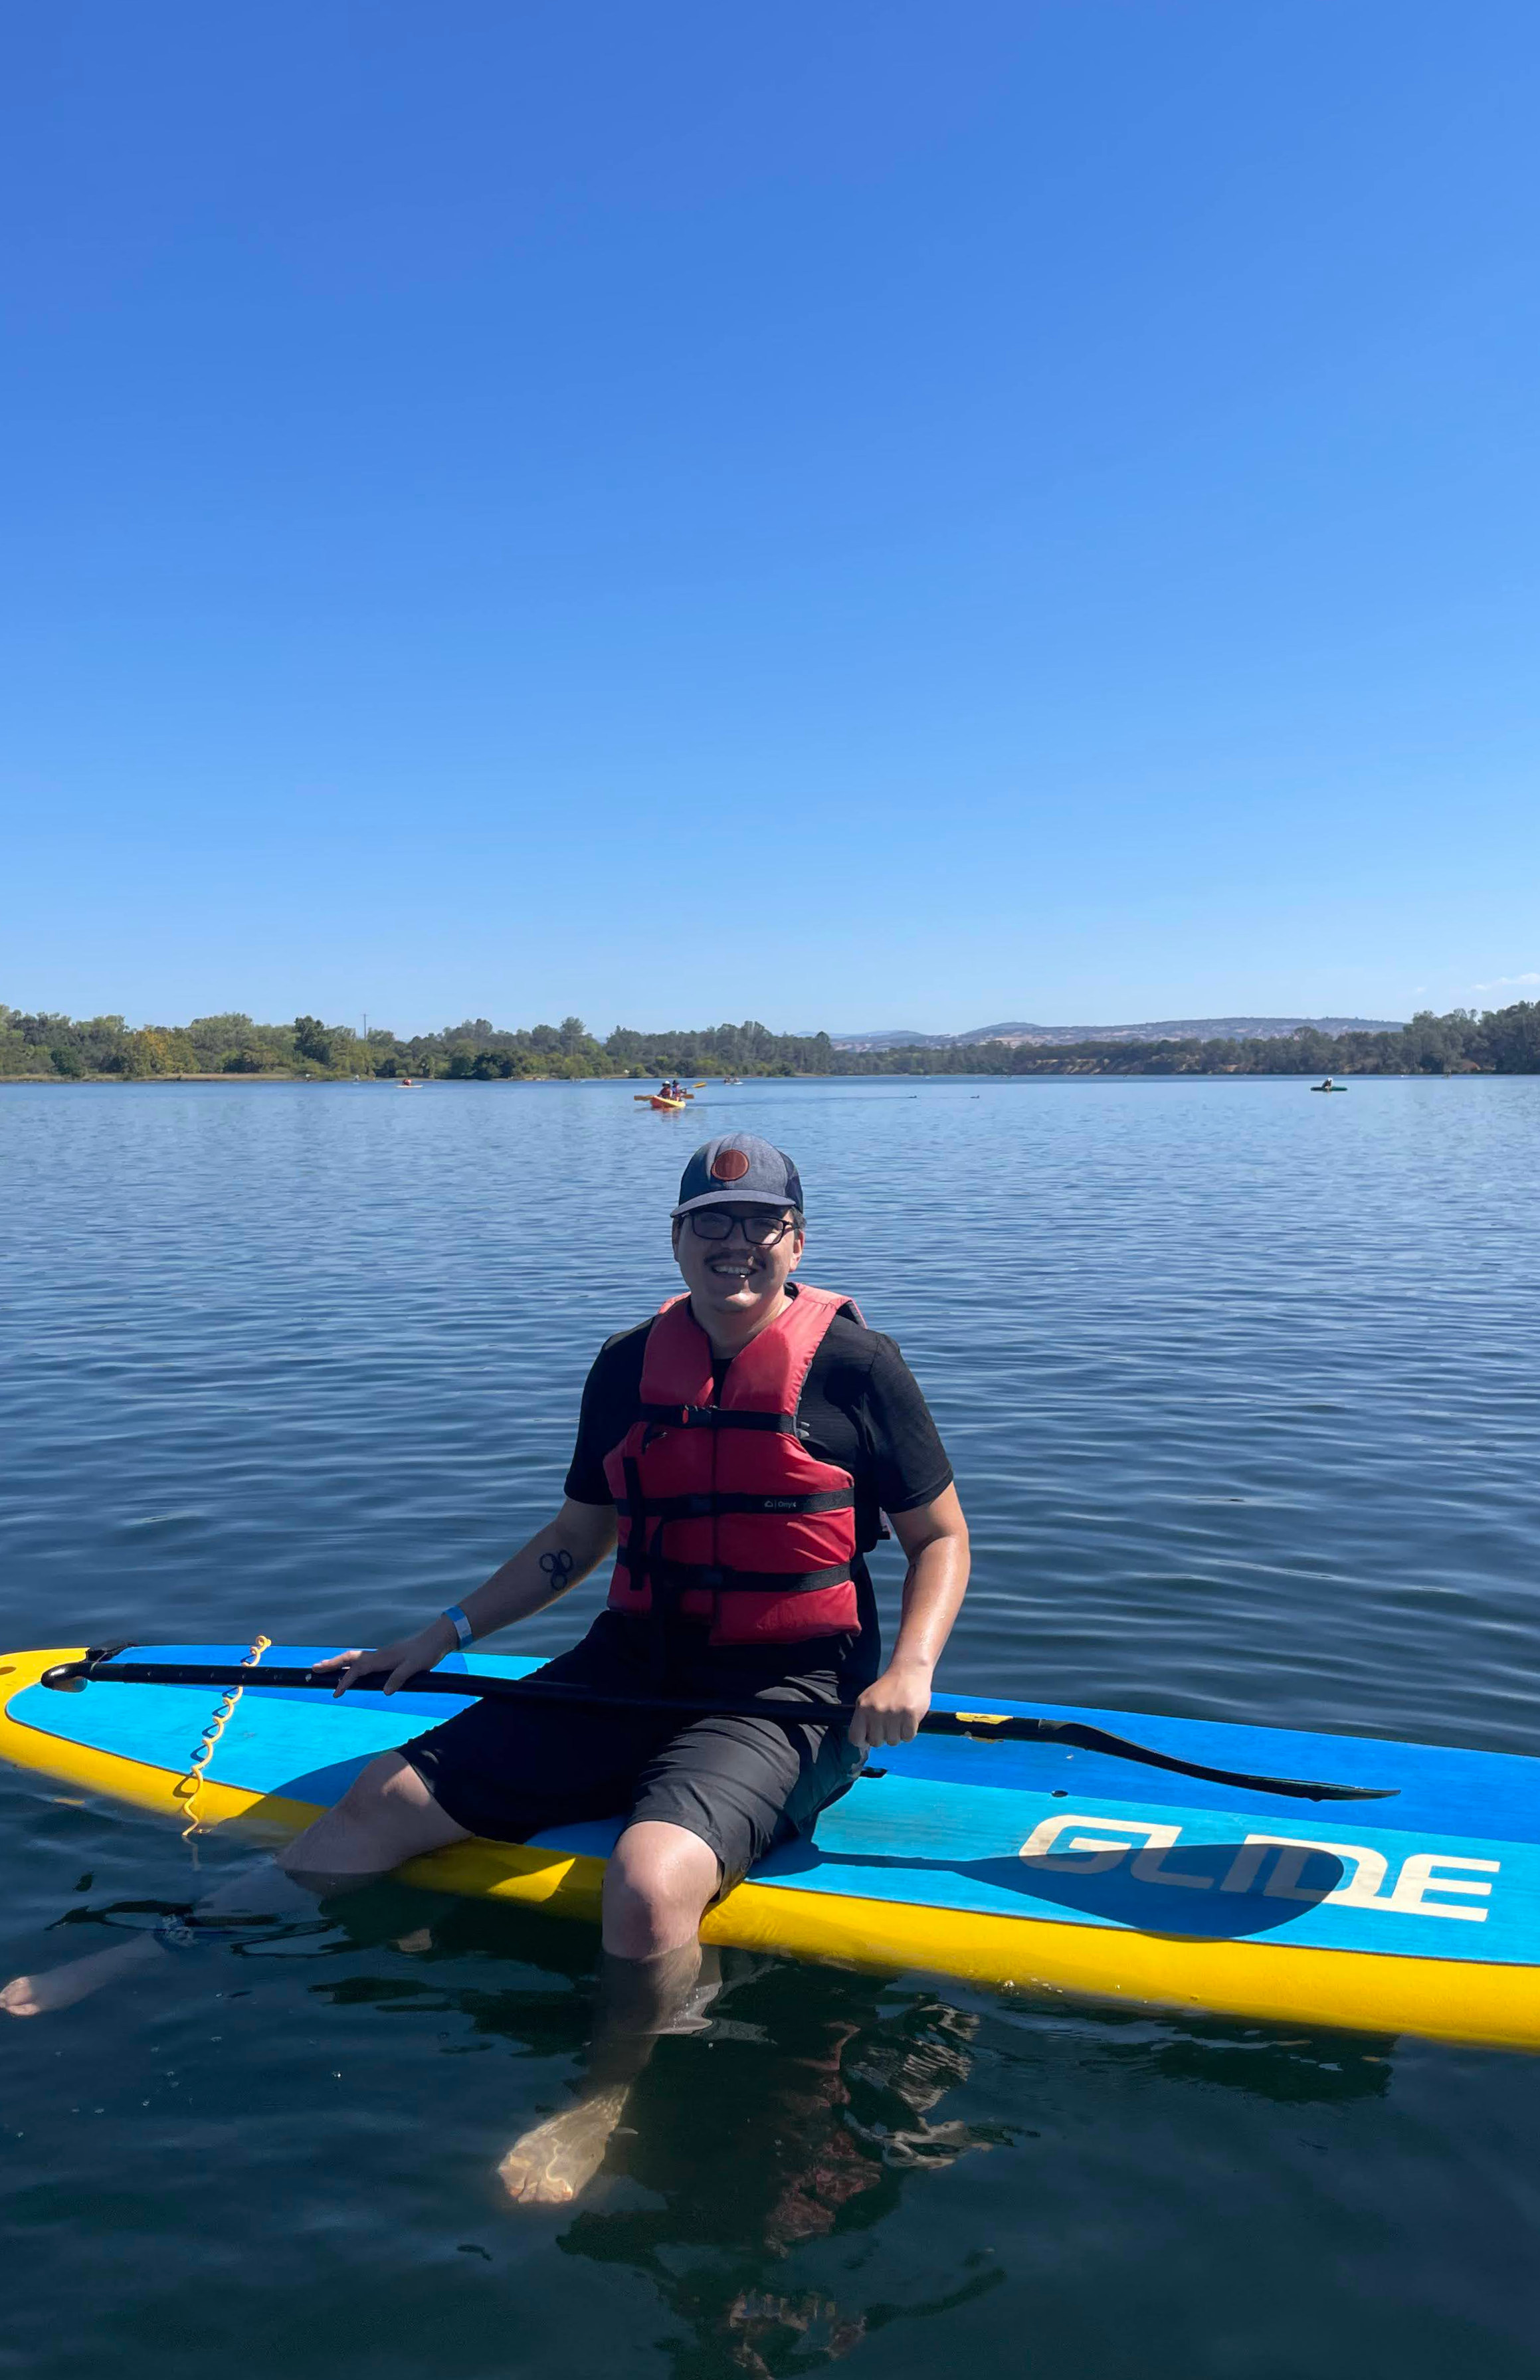 Man wearing a baseball cap and red floatation device sitting on a paddleboard